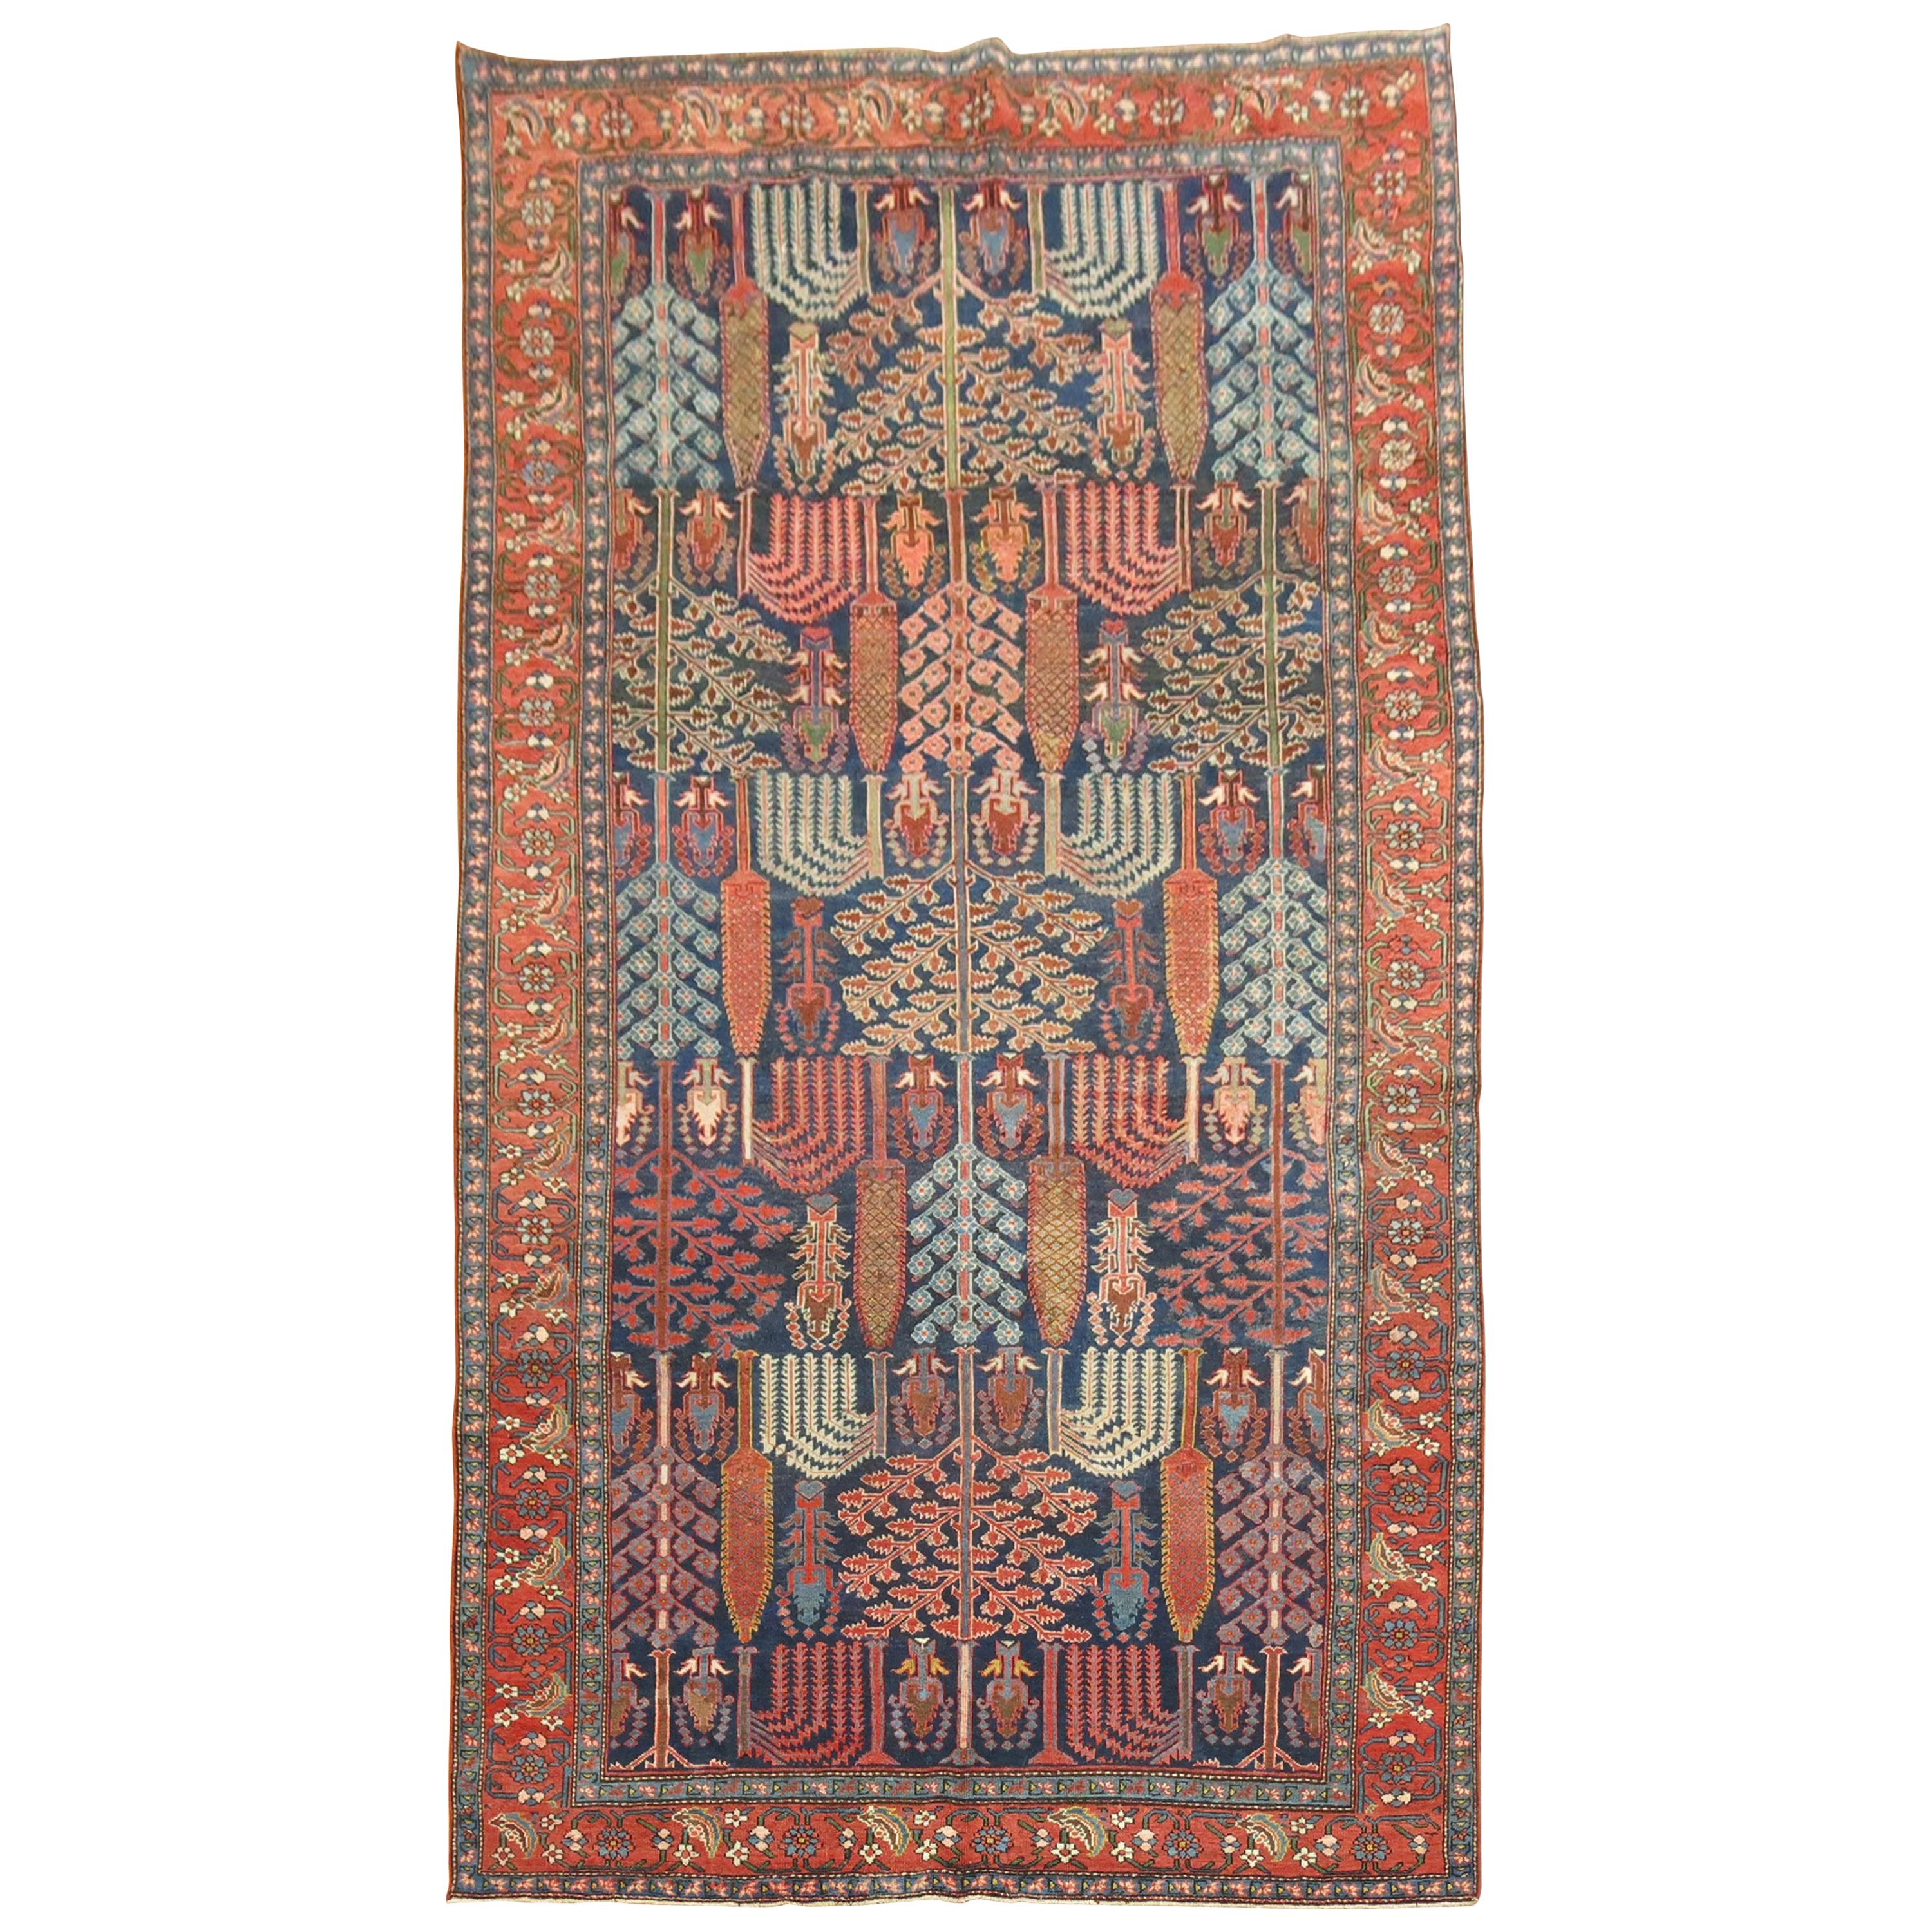 Antique Persian Malayer Willow Tree Rug